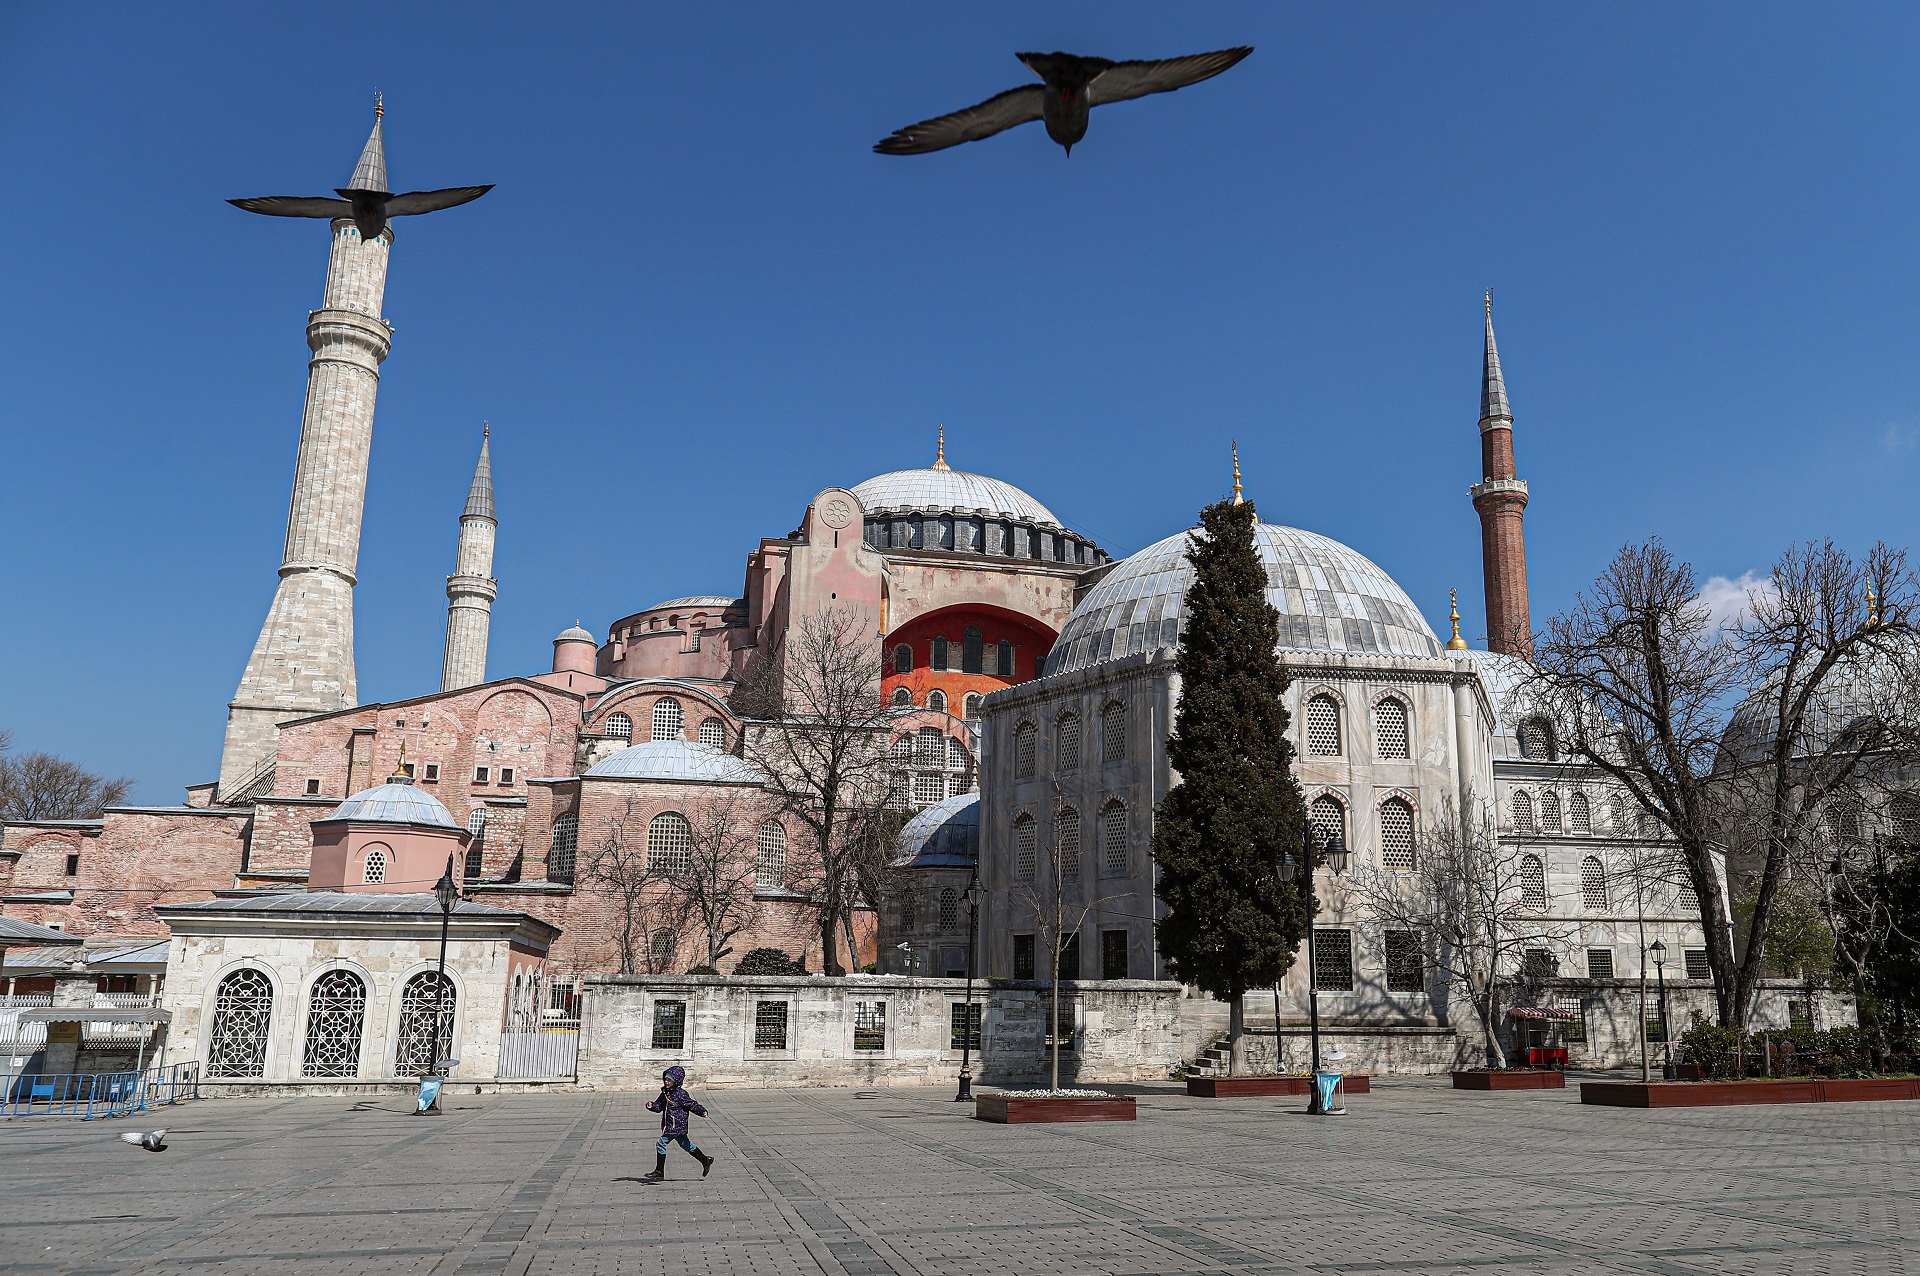 epa08522626 (FILE) - A view of the Hagia Sophia Museum in Istanbul, Turkey, 20 March 2020 (reissued 02 July 2020). According to media reports, a Turkish court delayed the decision on whether the 1,500 year old Unesco World Heritage site Hagia Sophia can be converted into a mosque, Turkey's President Erdogan called for.  EPA/SEDAT SUNA *** Local Caption *** 55968877